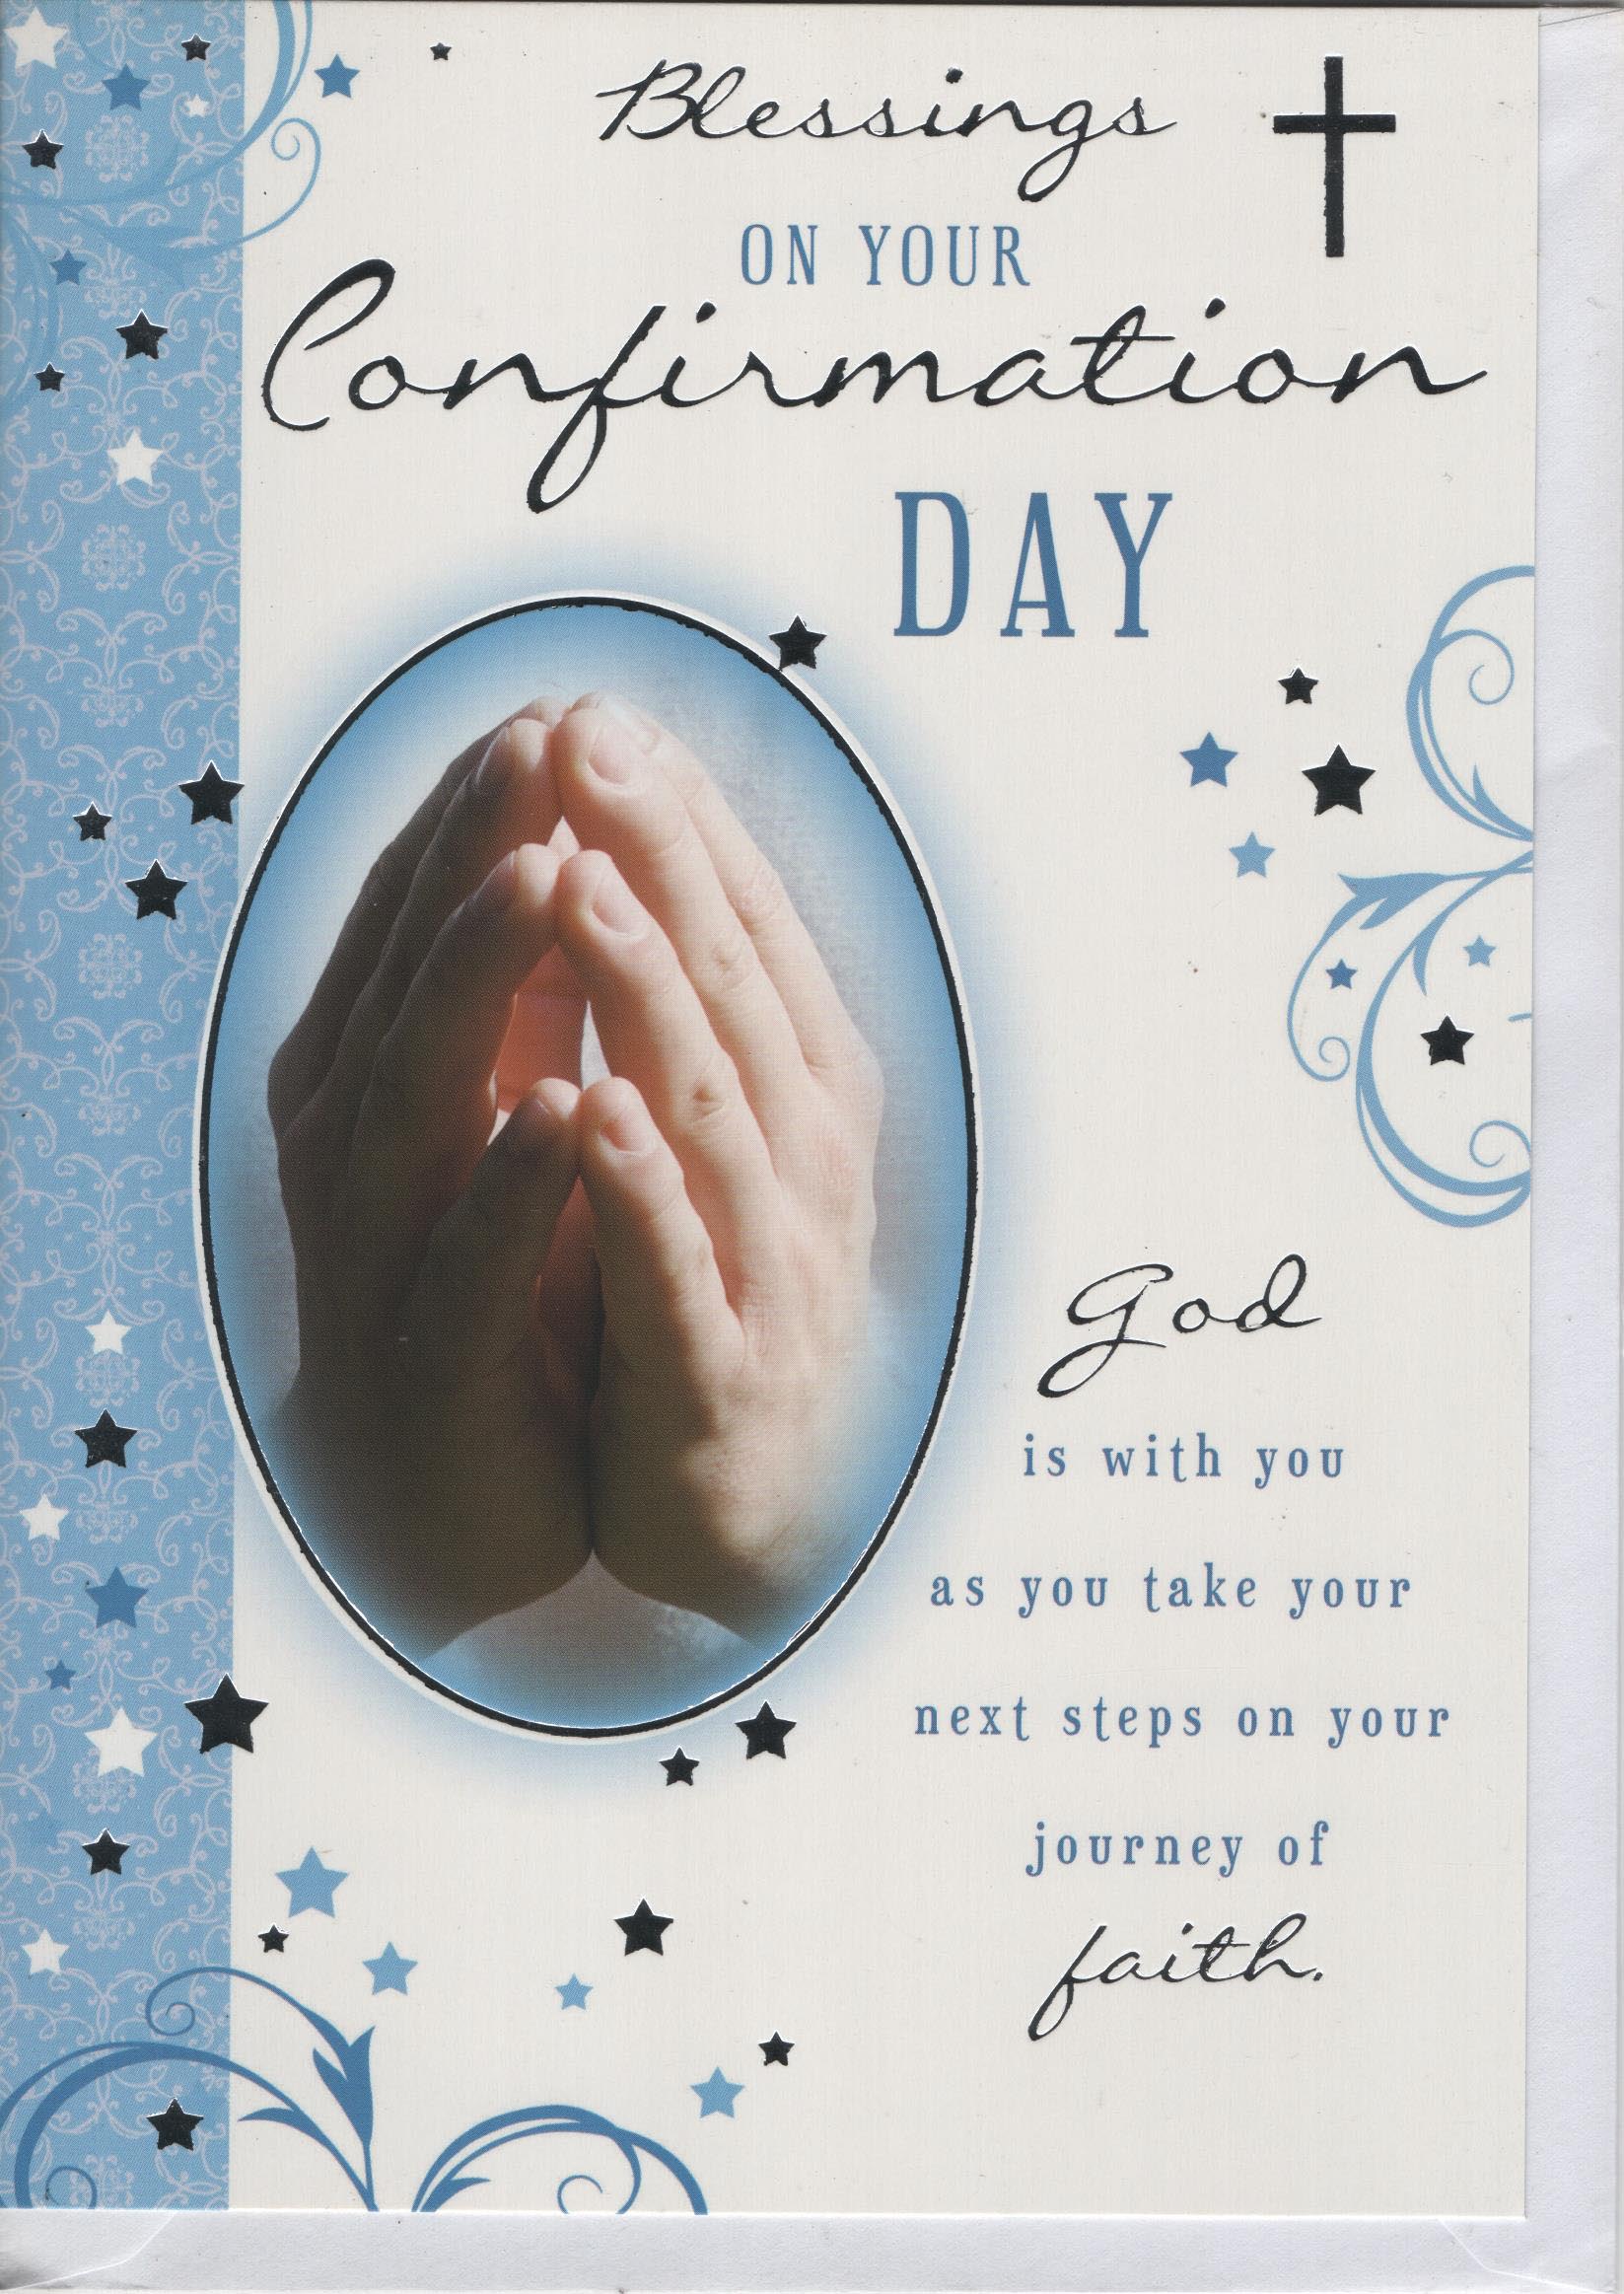 Blessings on Your Confirmation Day Greeting Card